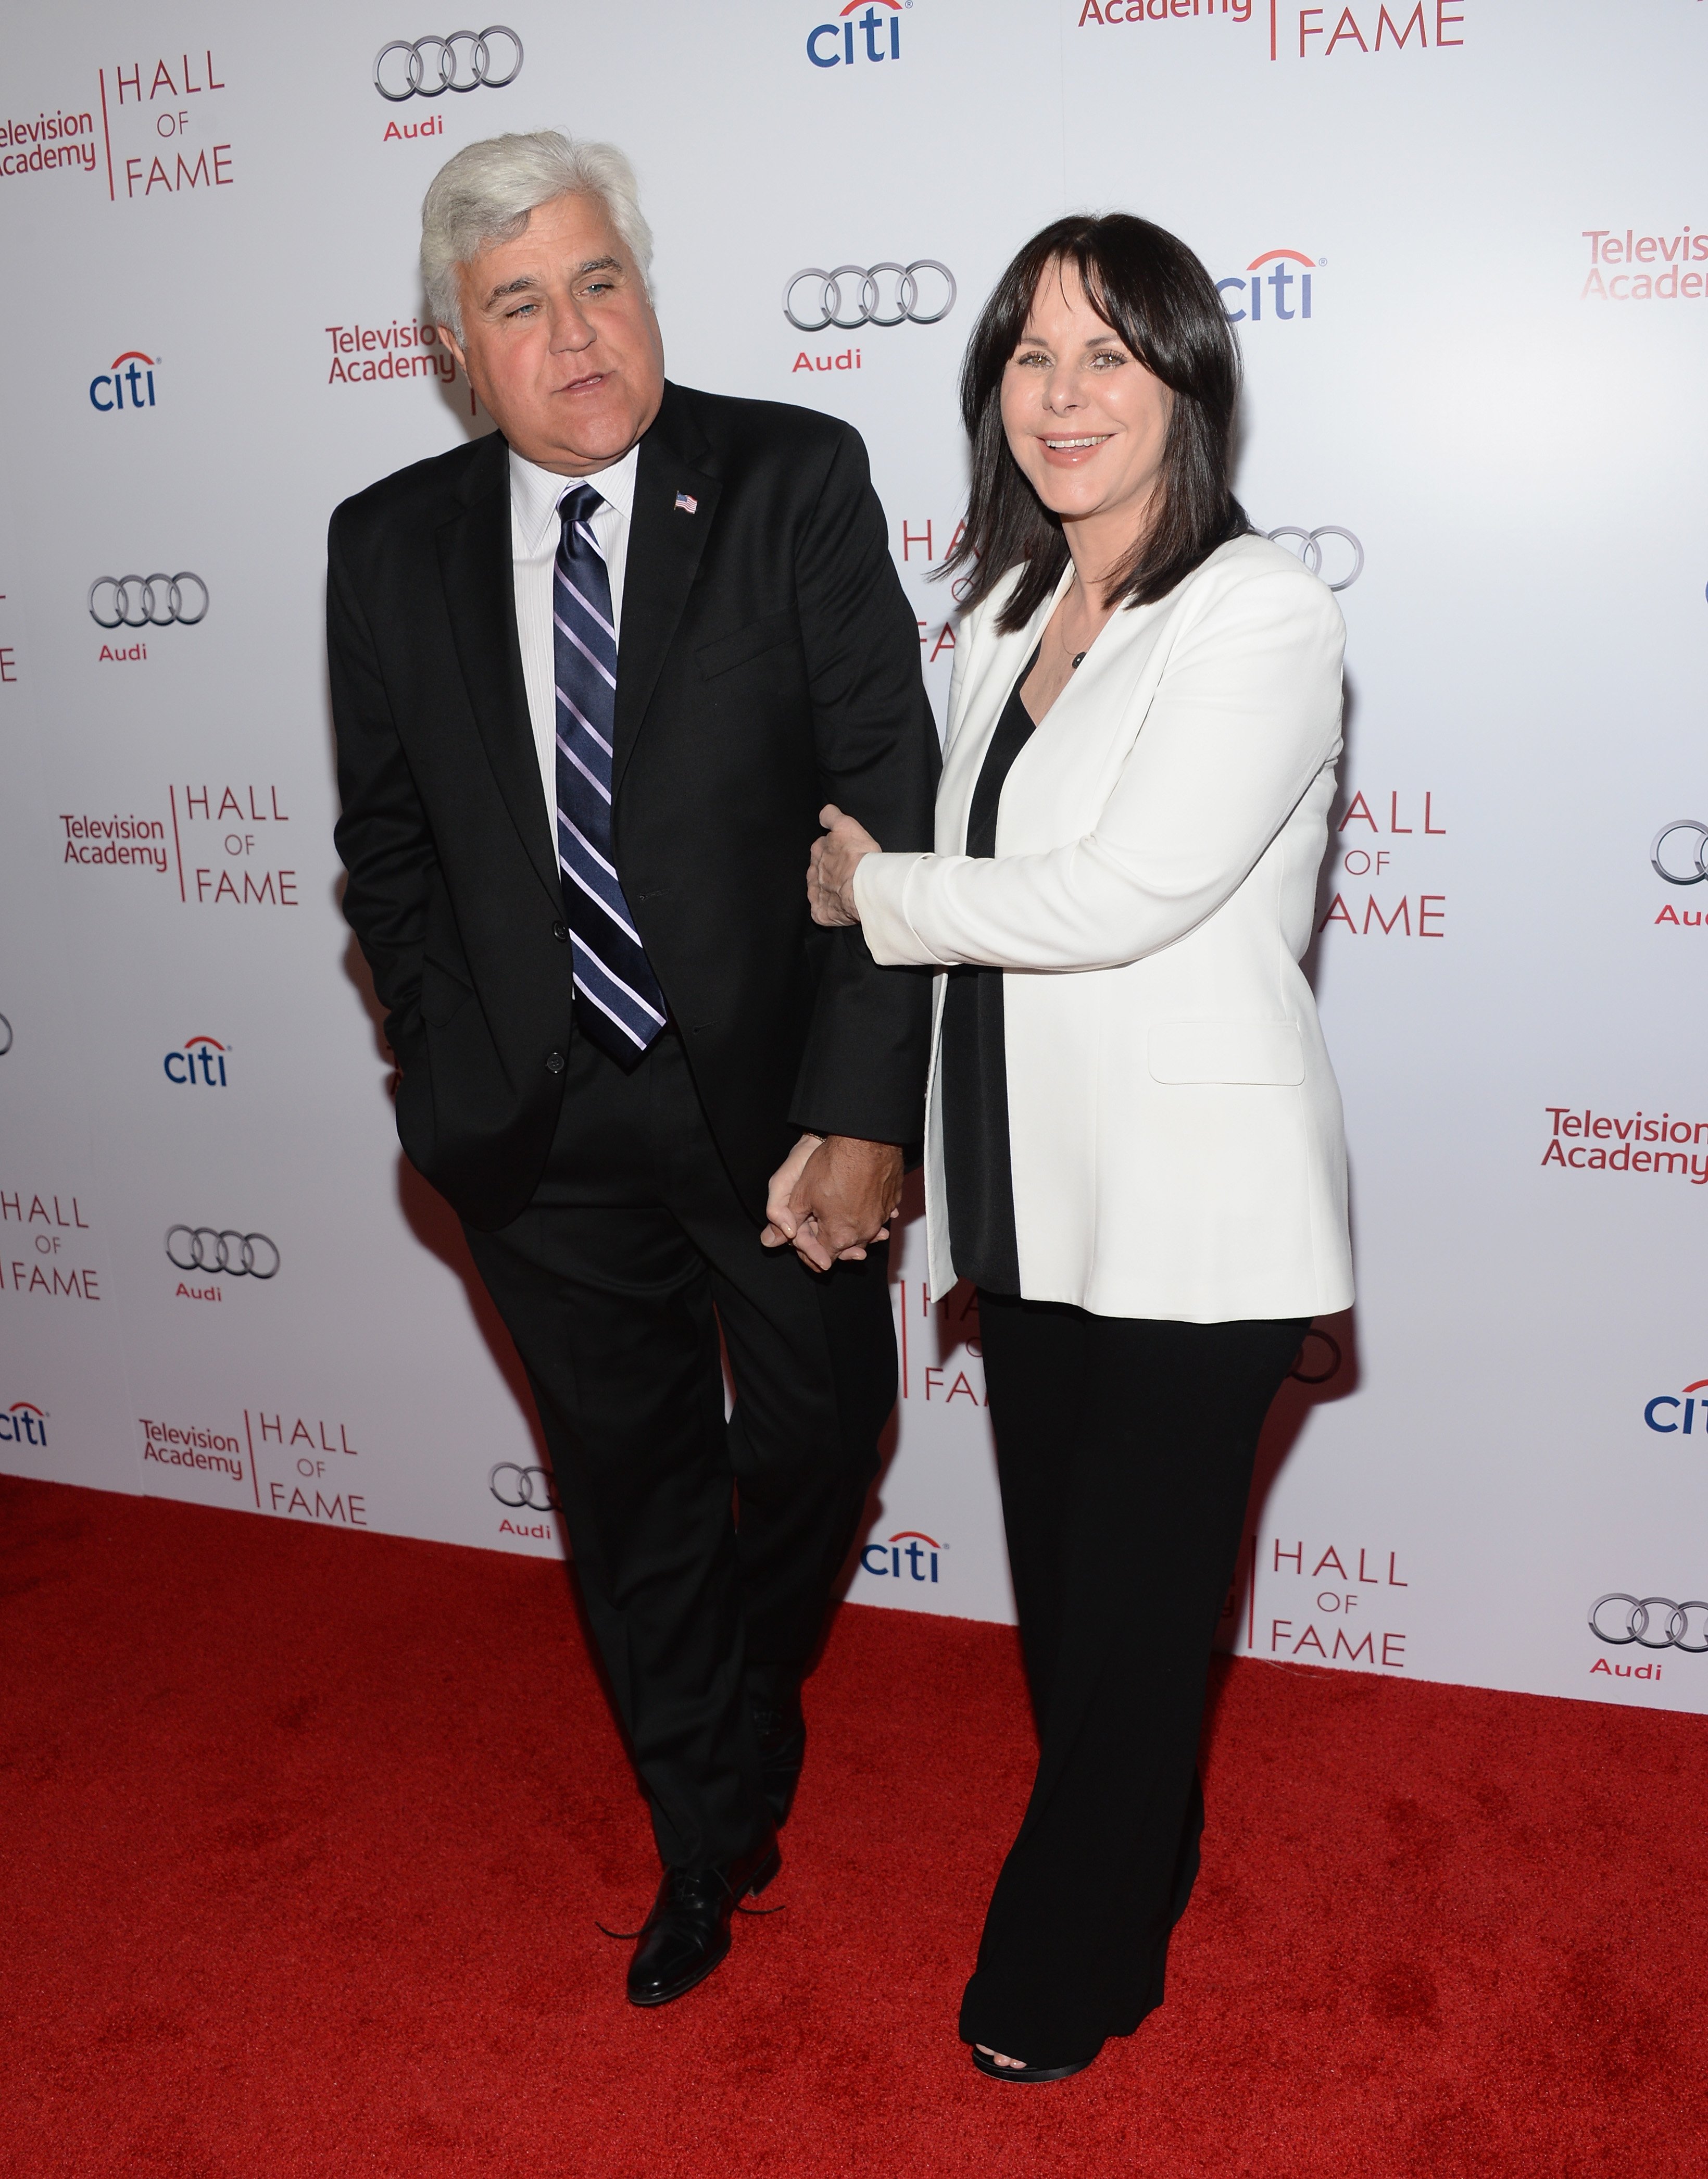 Jay Leno and Mavis Leno at The Television Academy's 23rd Hall of Fame Induction Gala on March 11, 2014 in California | Source: Getty Images